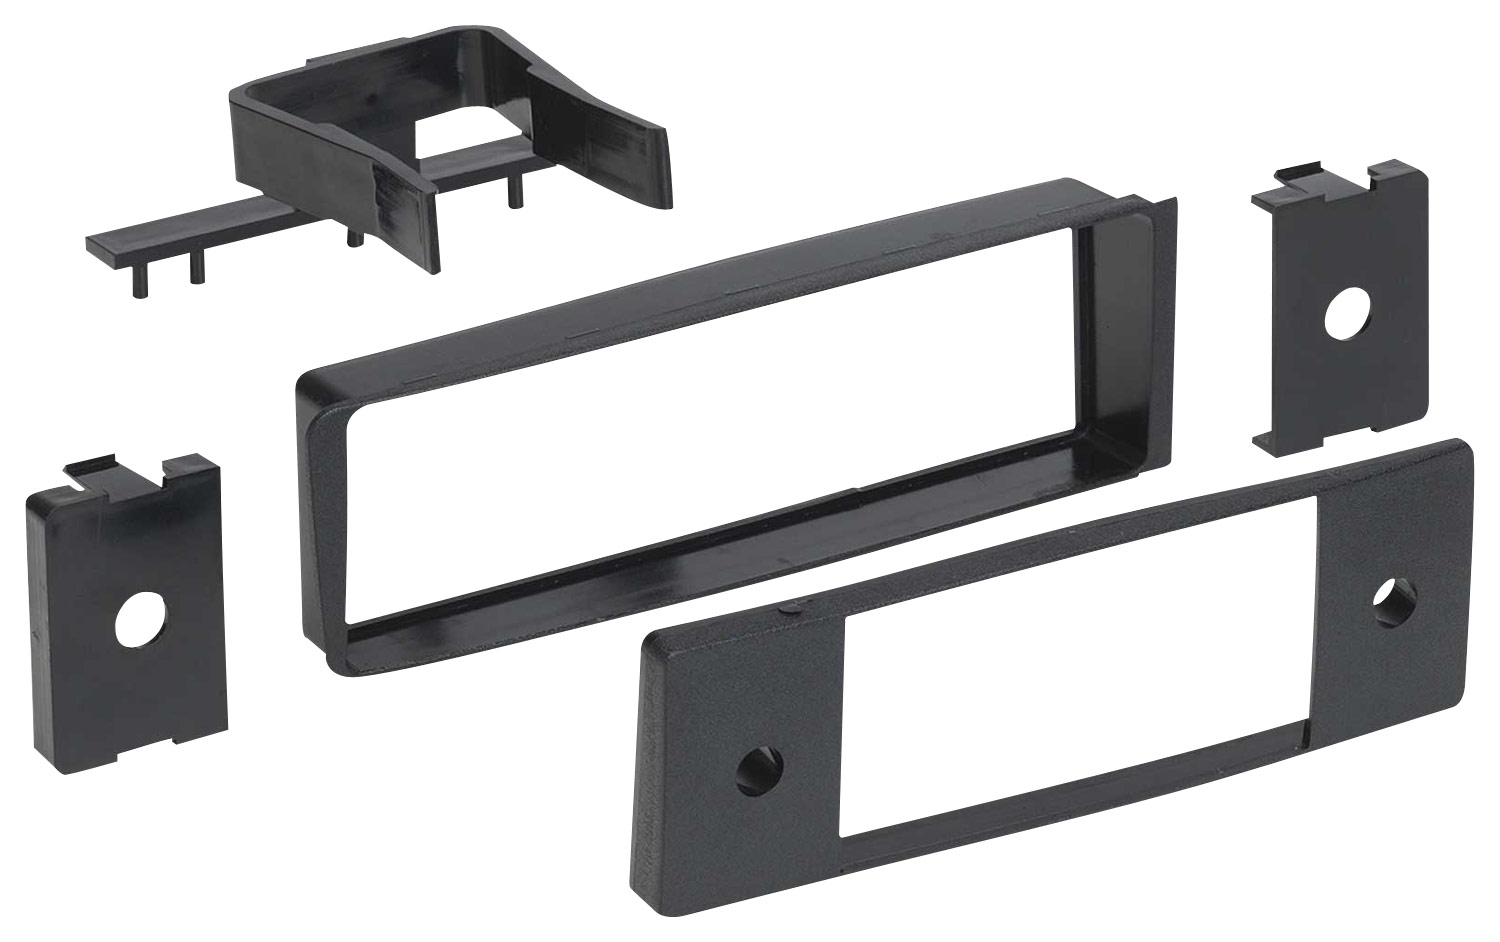 Metra - Dash Kit for Select 1996-1998 Honda Civic - Black was $16.99 now $12.74 (25.0% off)